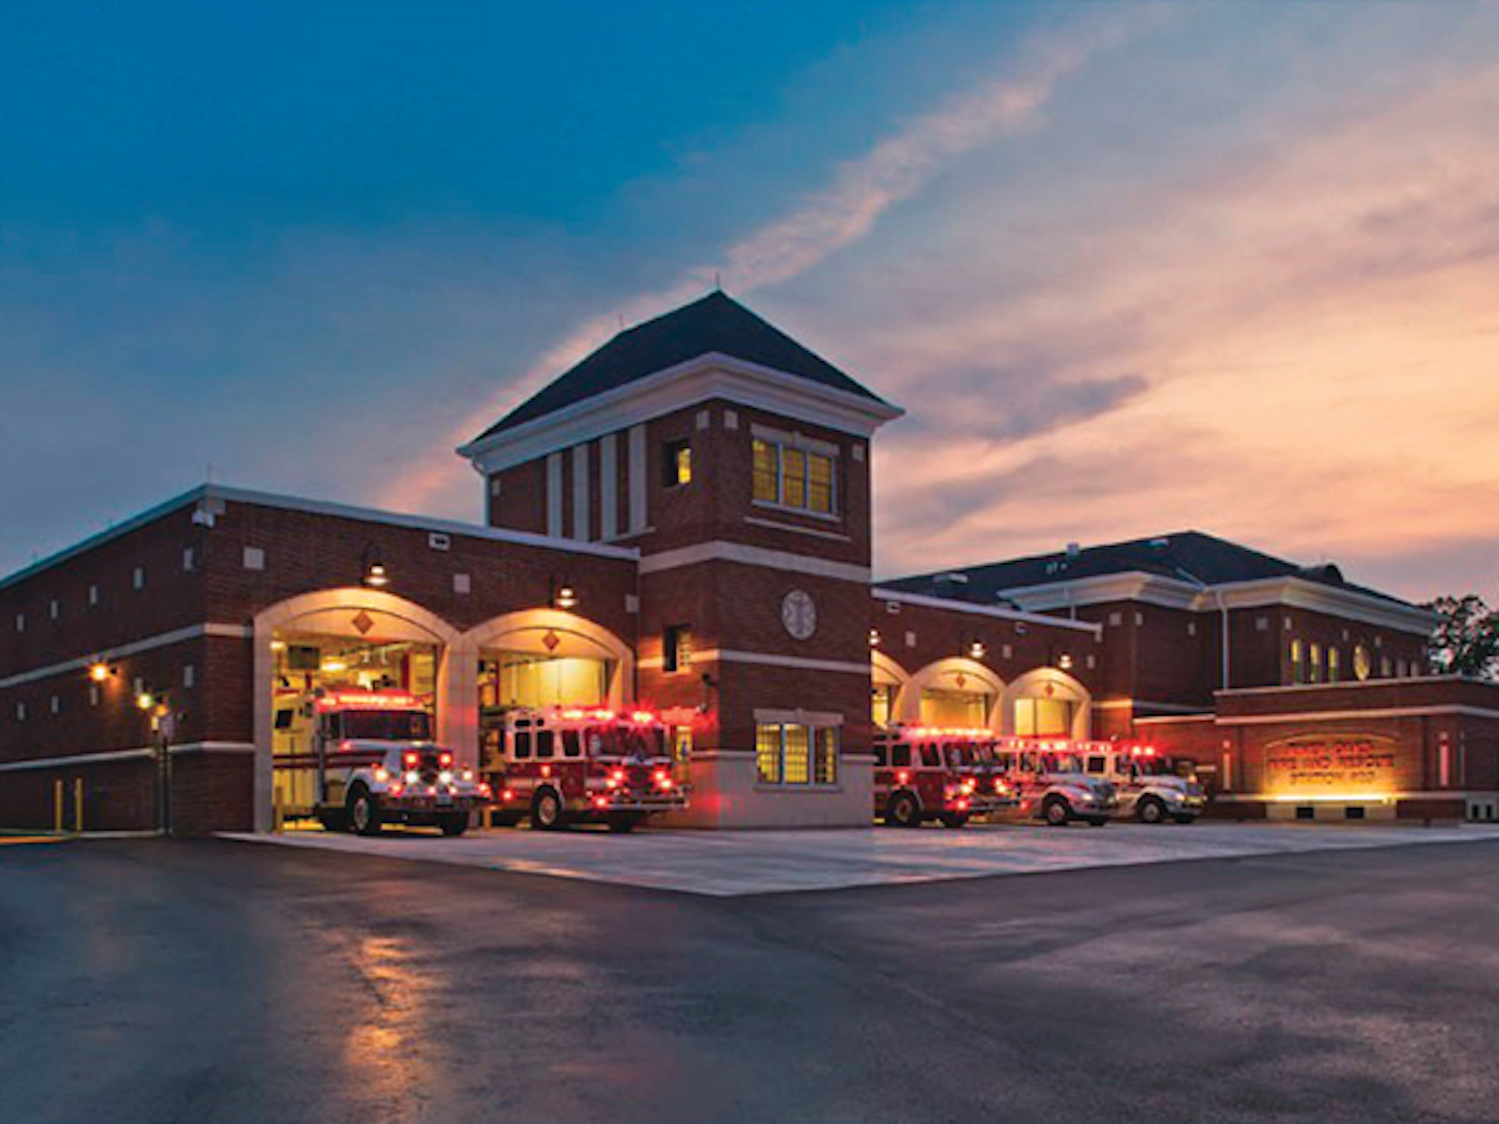 Fire Station Design Building is on the Rebound Firehouse